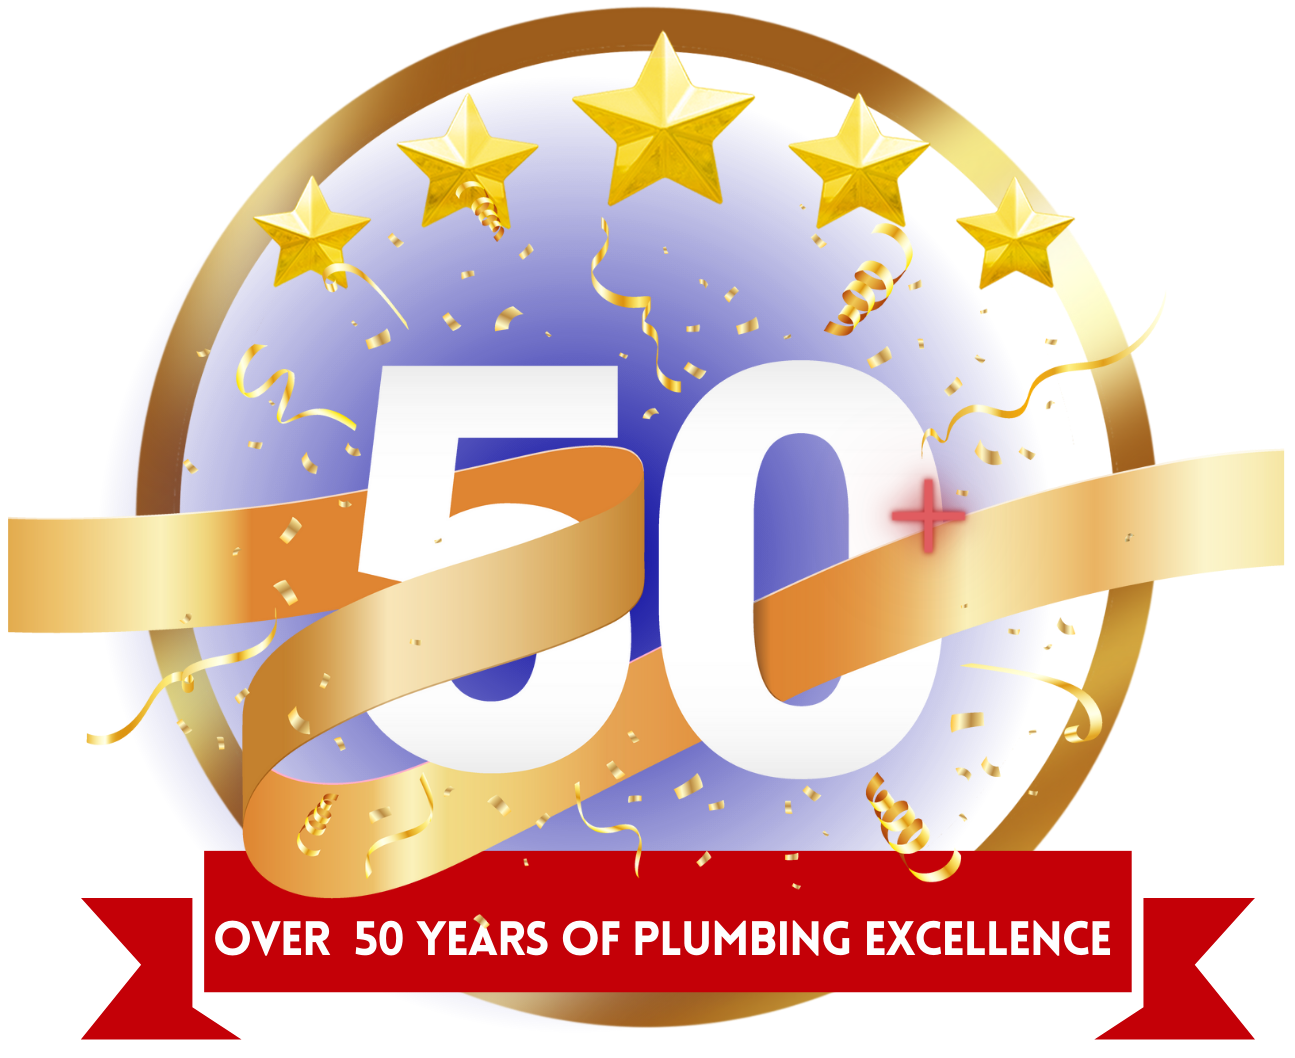 a logo for over 50 years of plumbing excellence